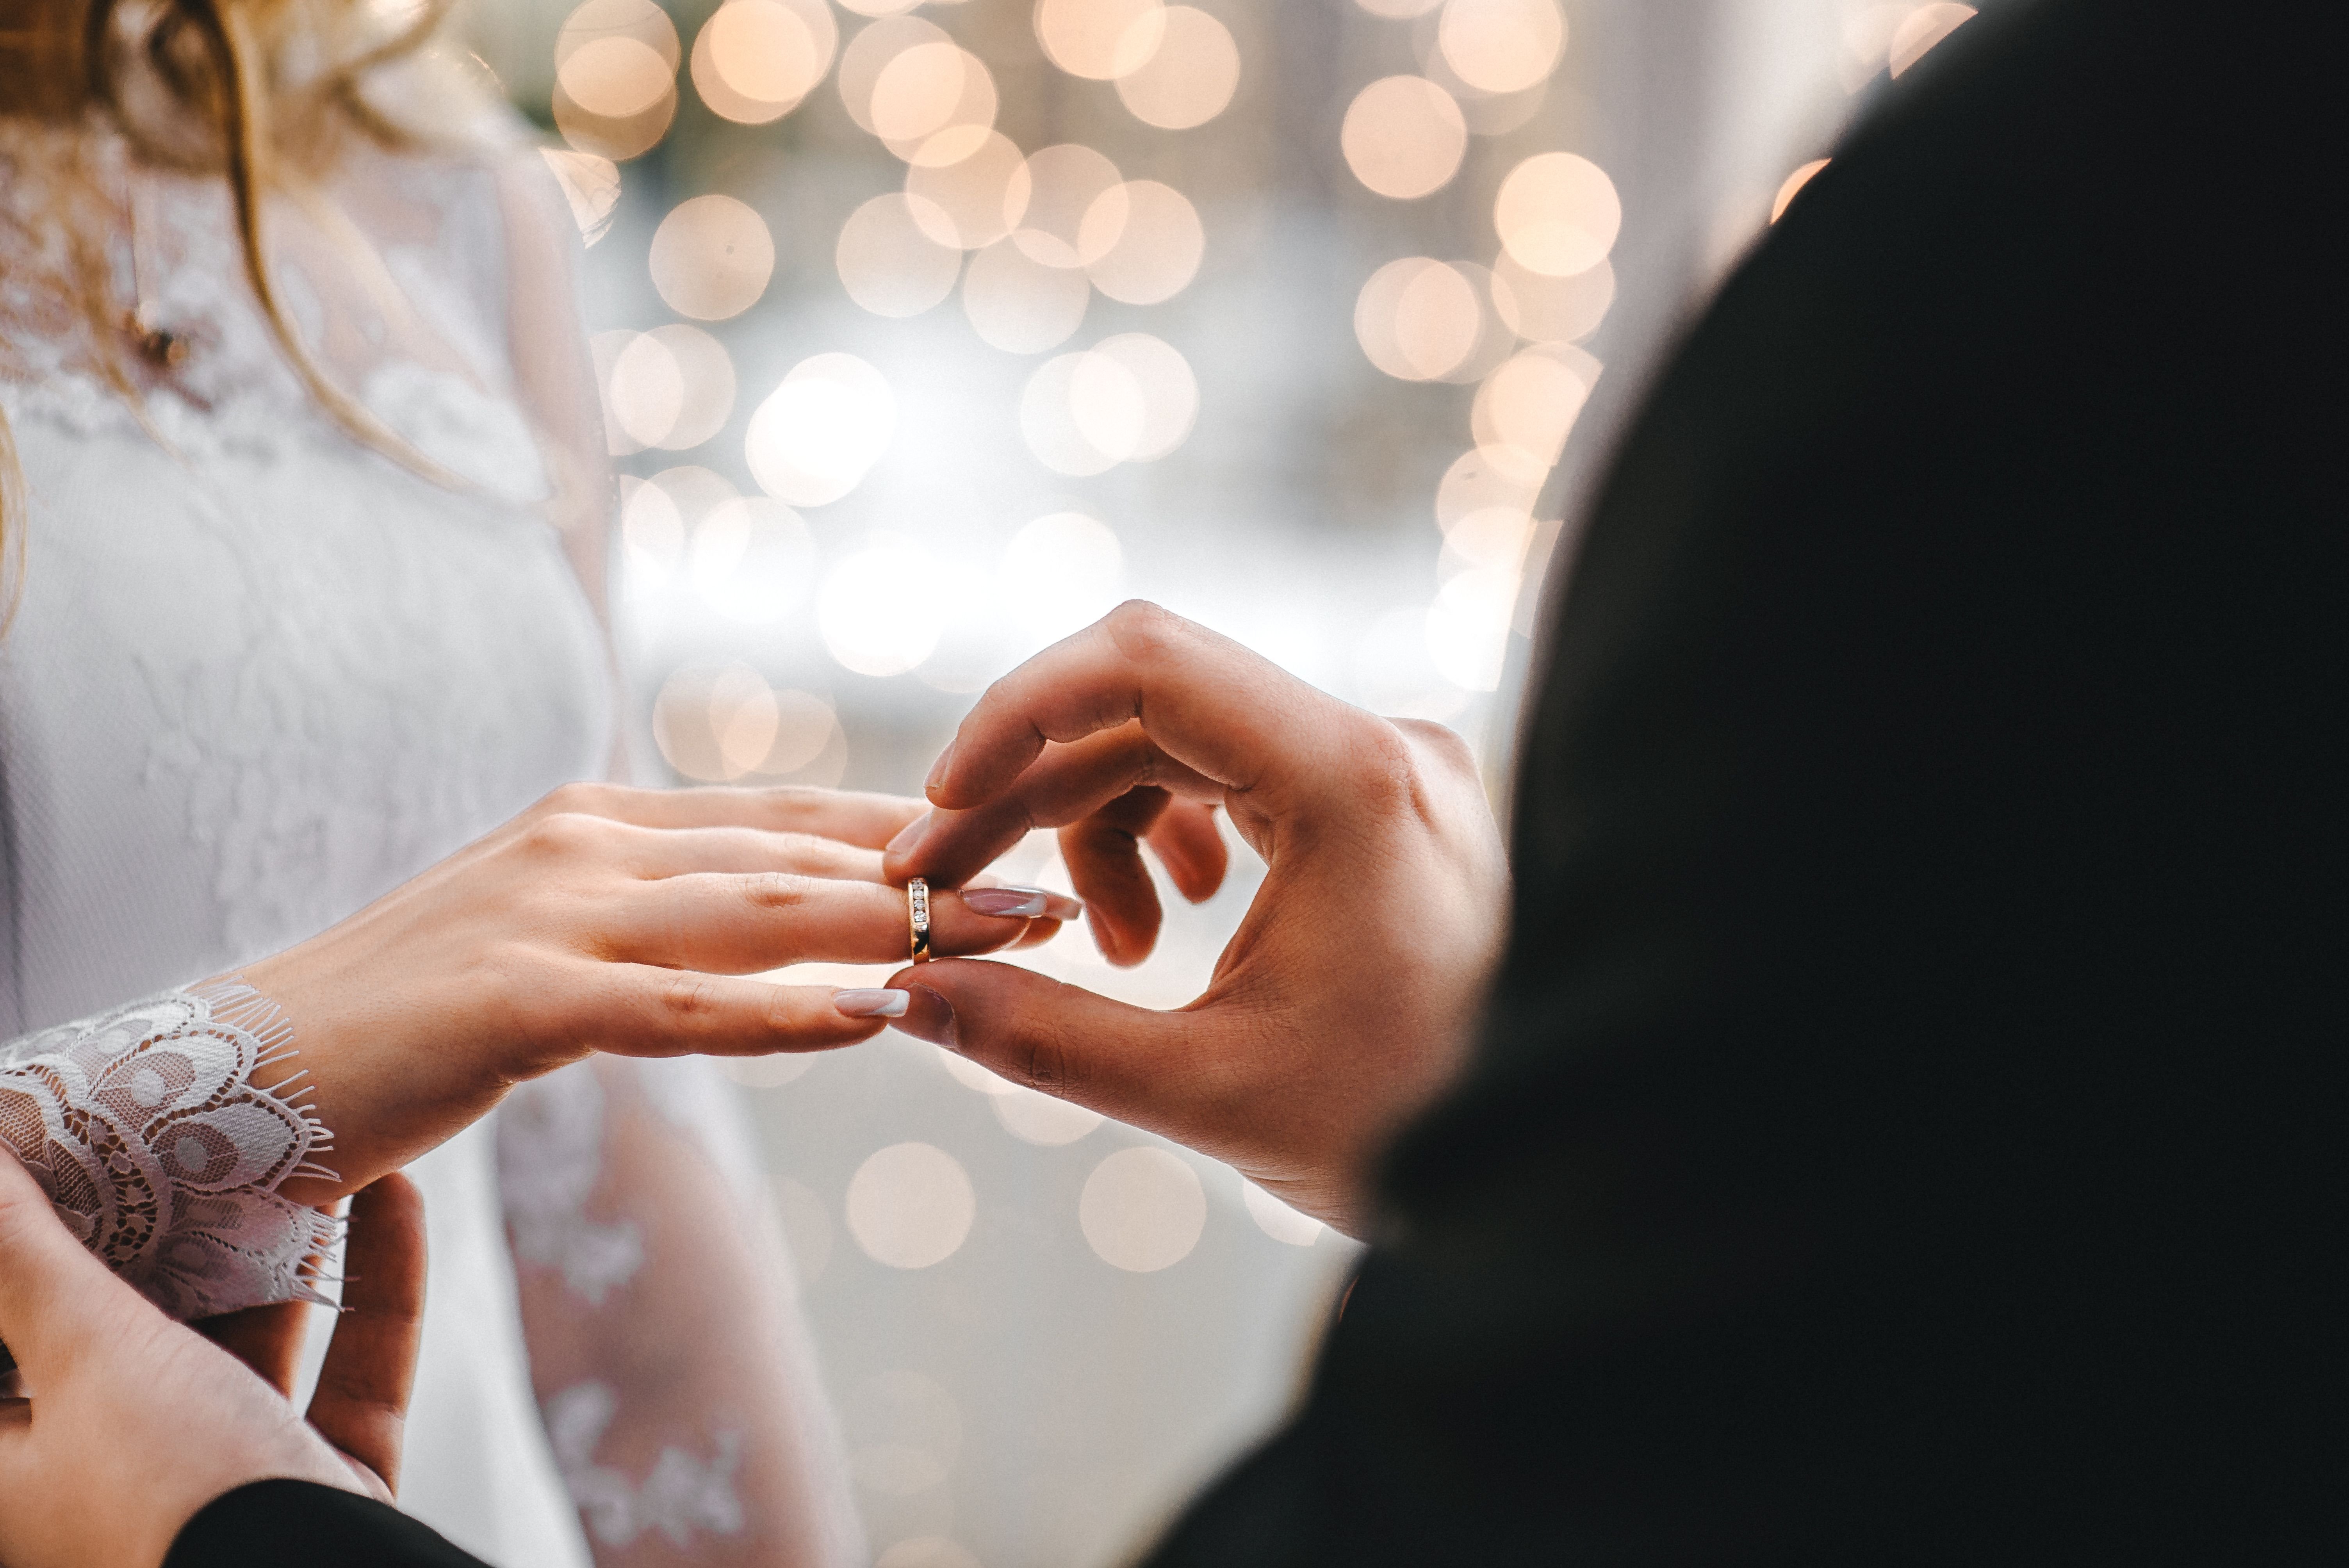 A groom places a wedding ring on his bride's finger. | Source: Shutterstock